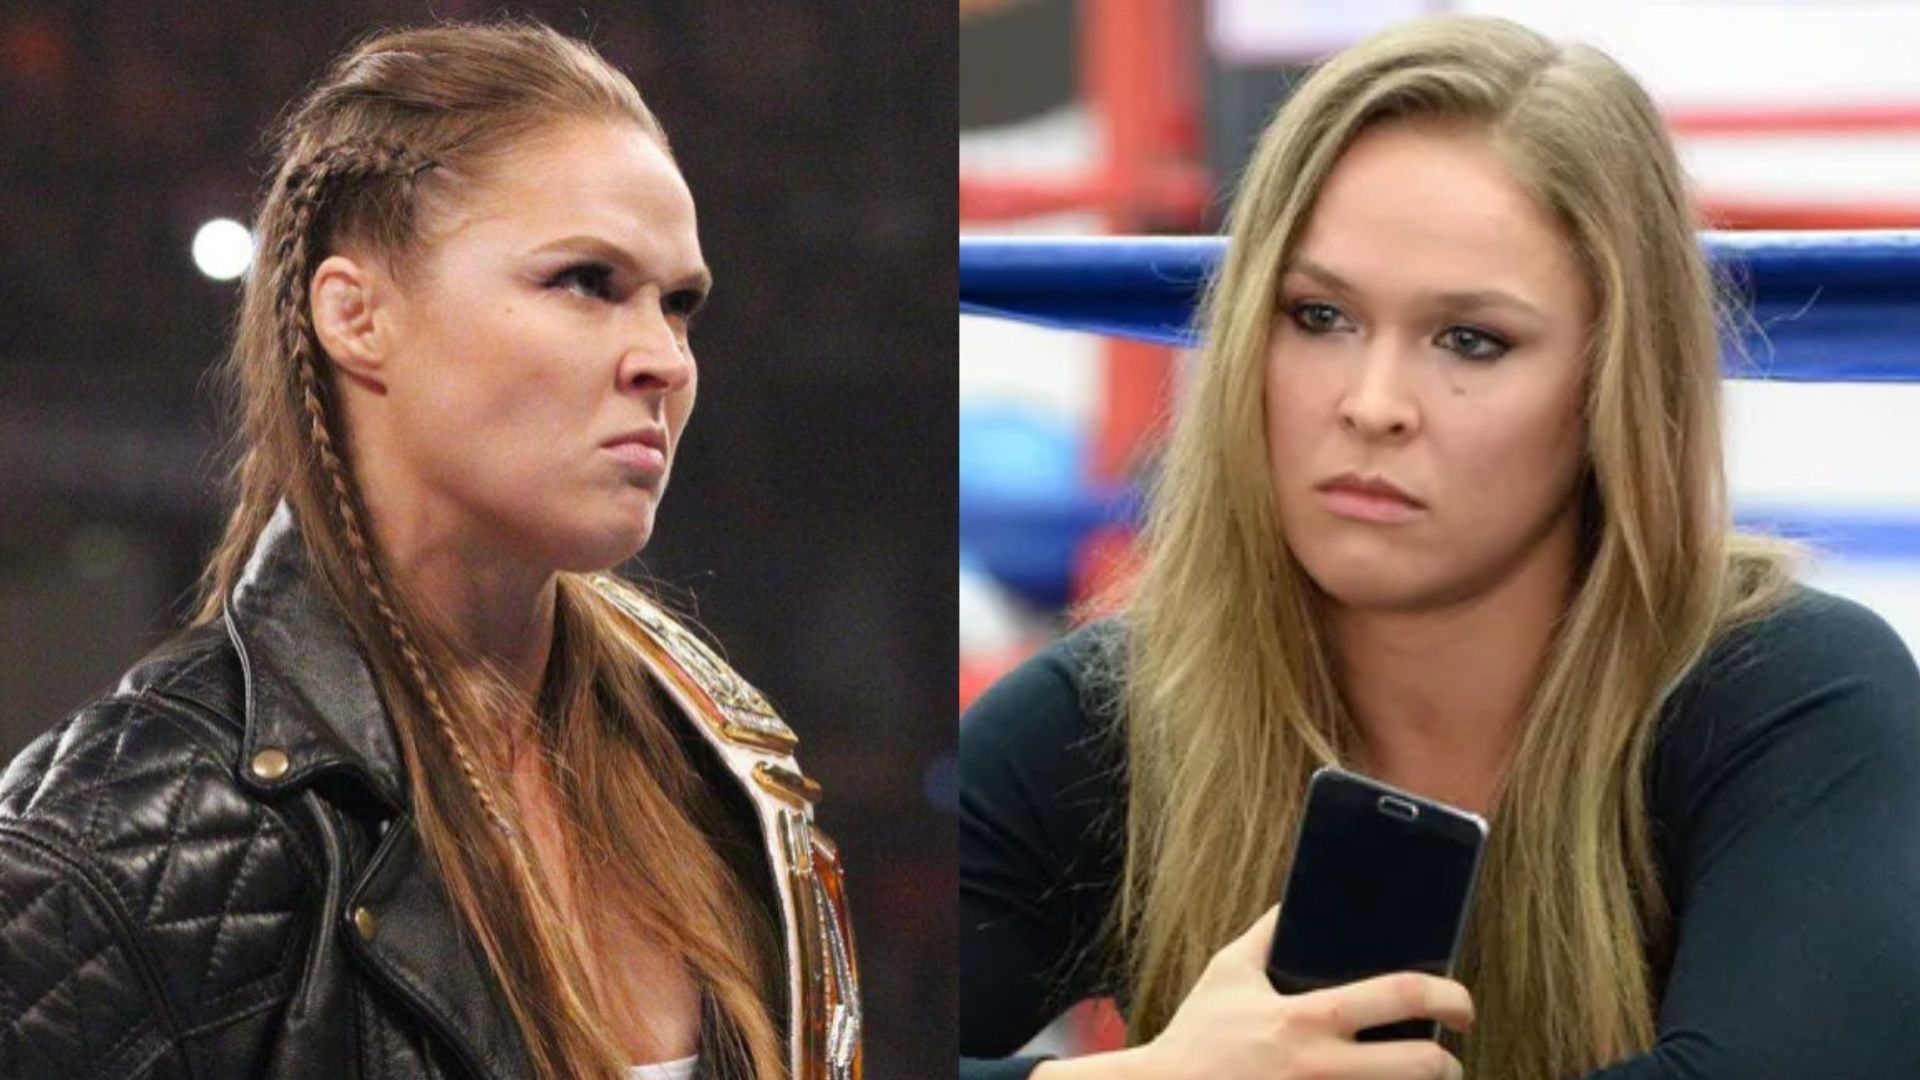 Ronda Rousey had a short but successful WWE career.